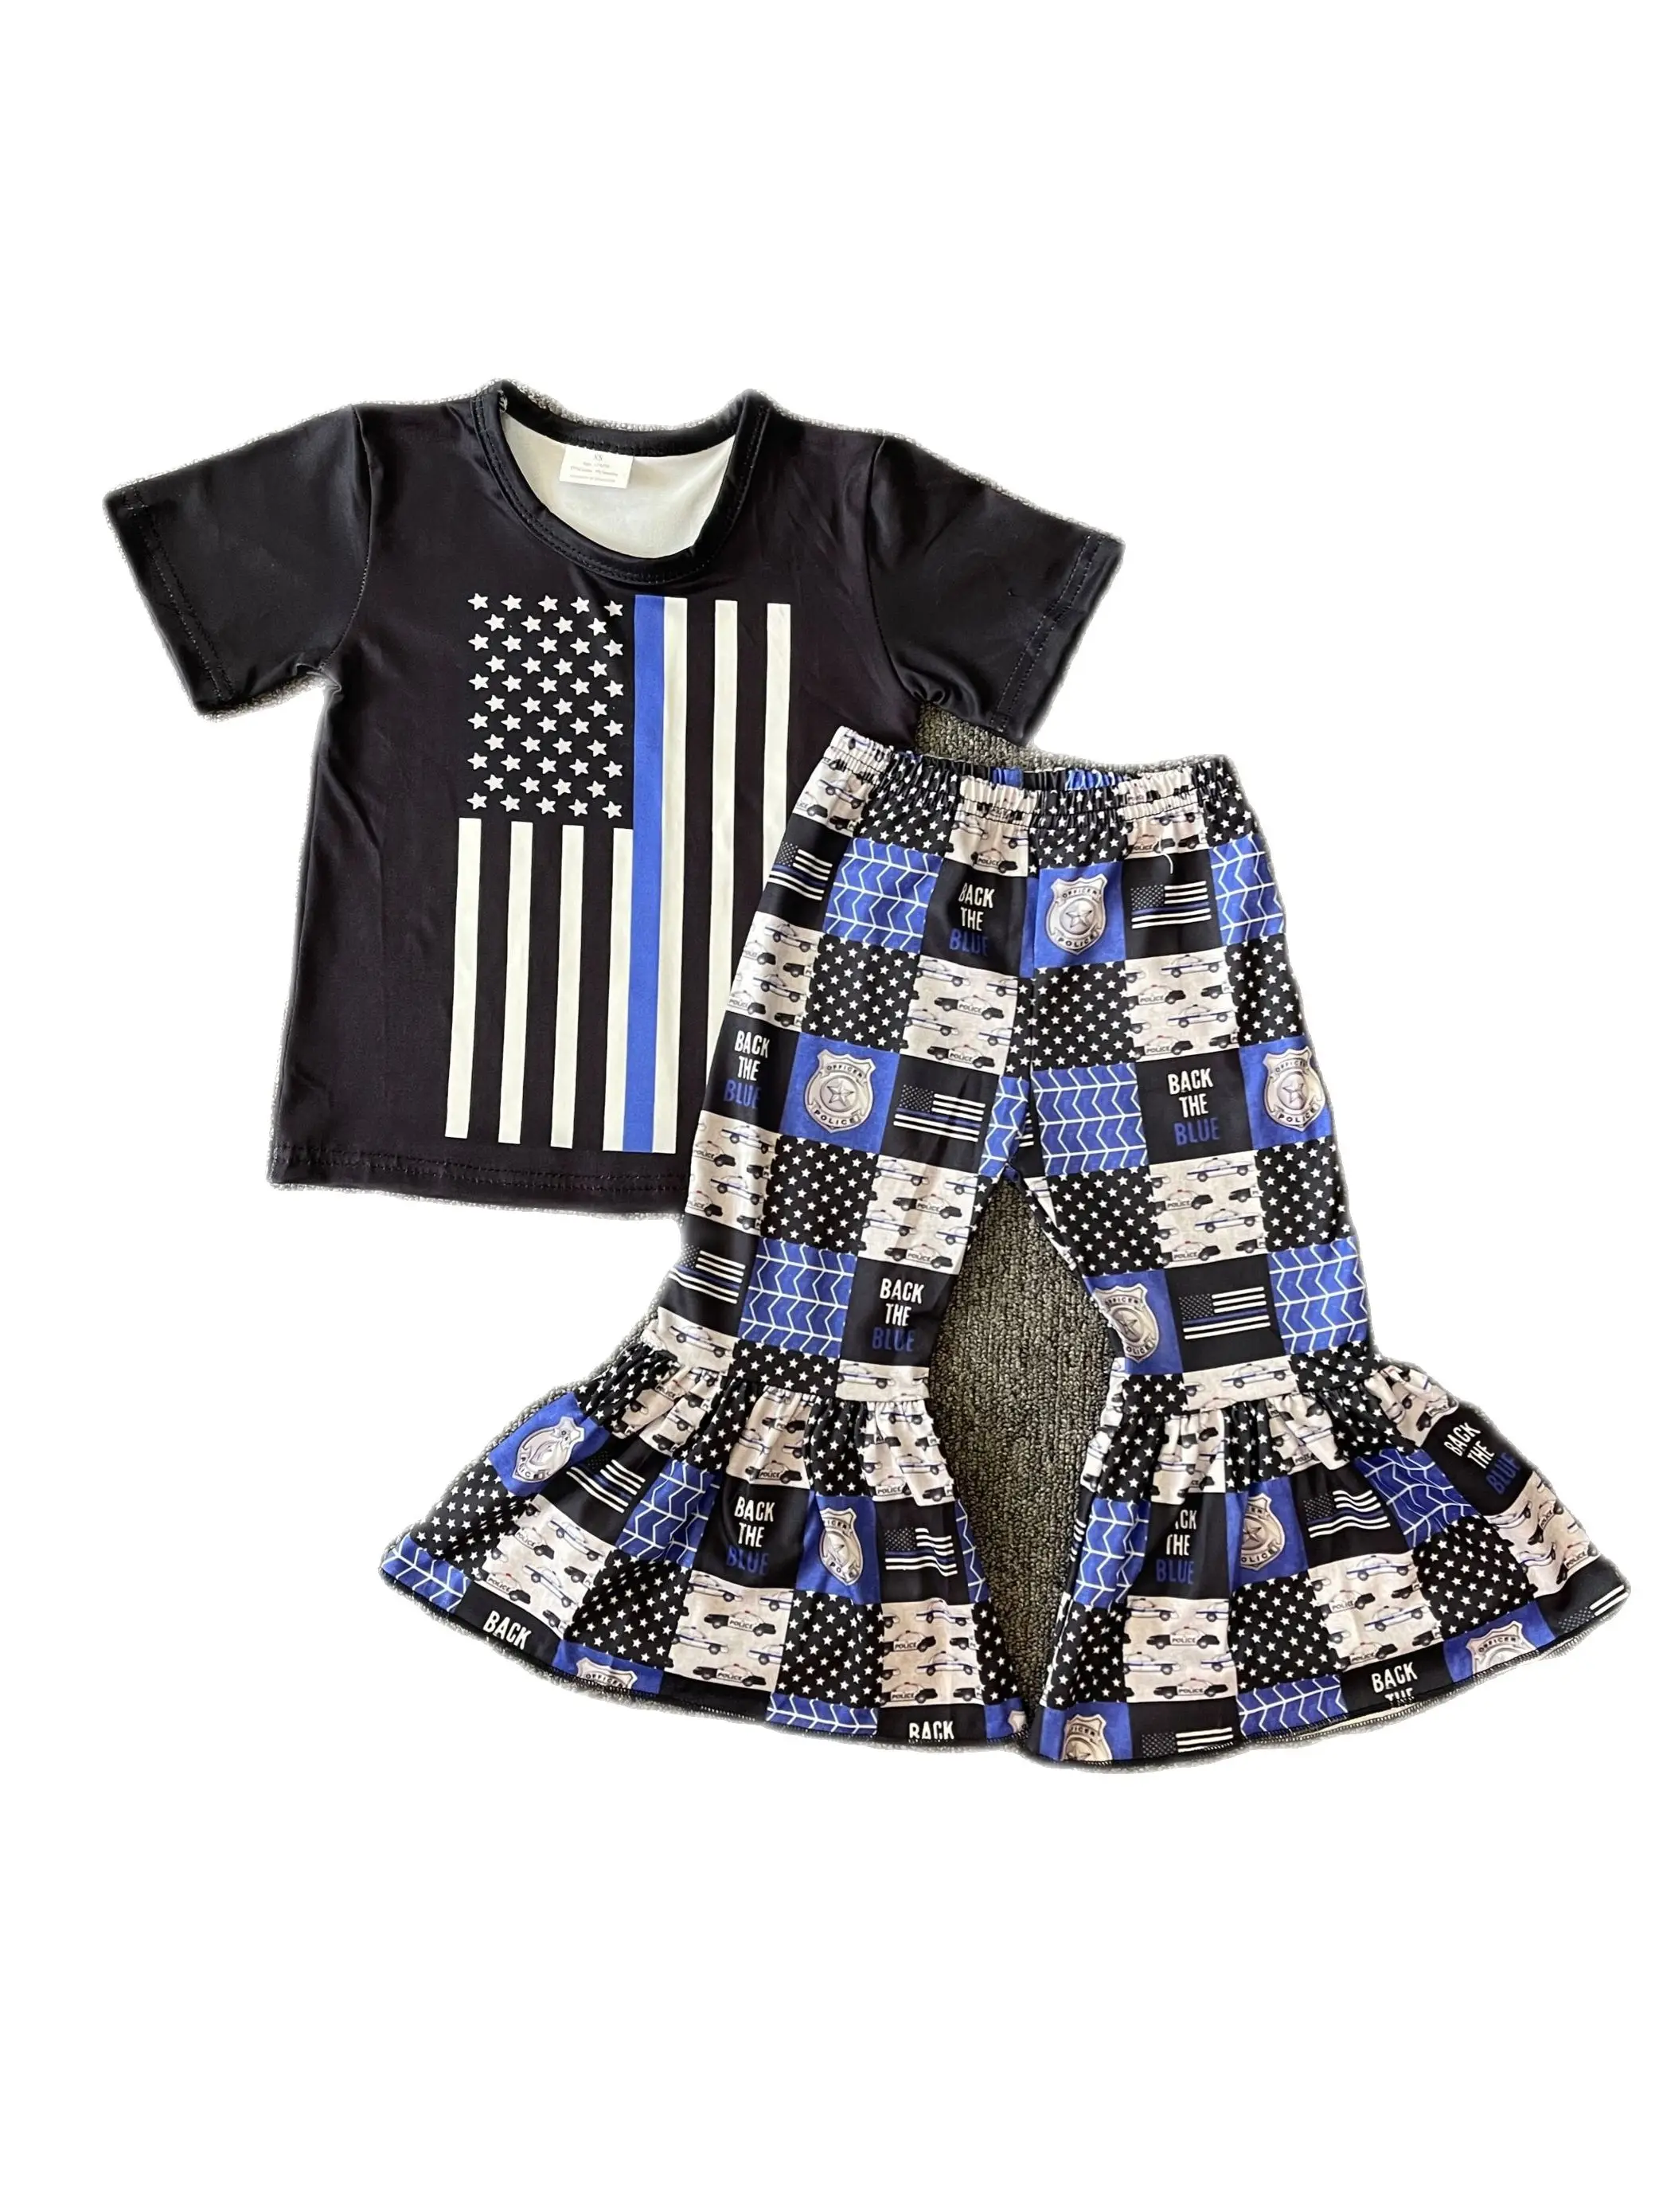 Independence Day Series Boutique Boys and Girls Clothing Summer Boys Suit Short Sleeve Printed Top Flared Pants 2-Piece Set